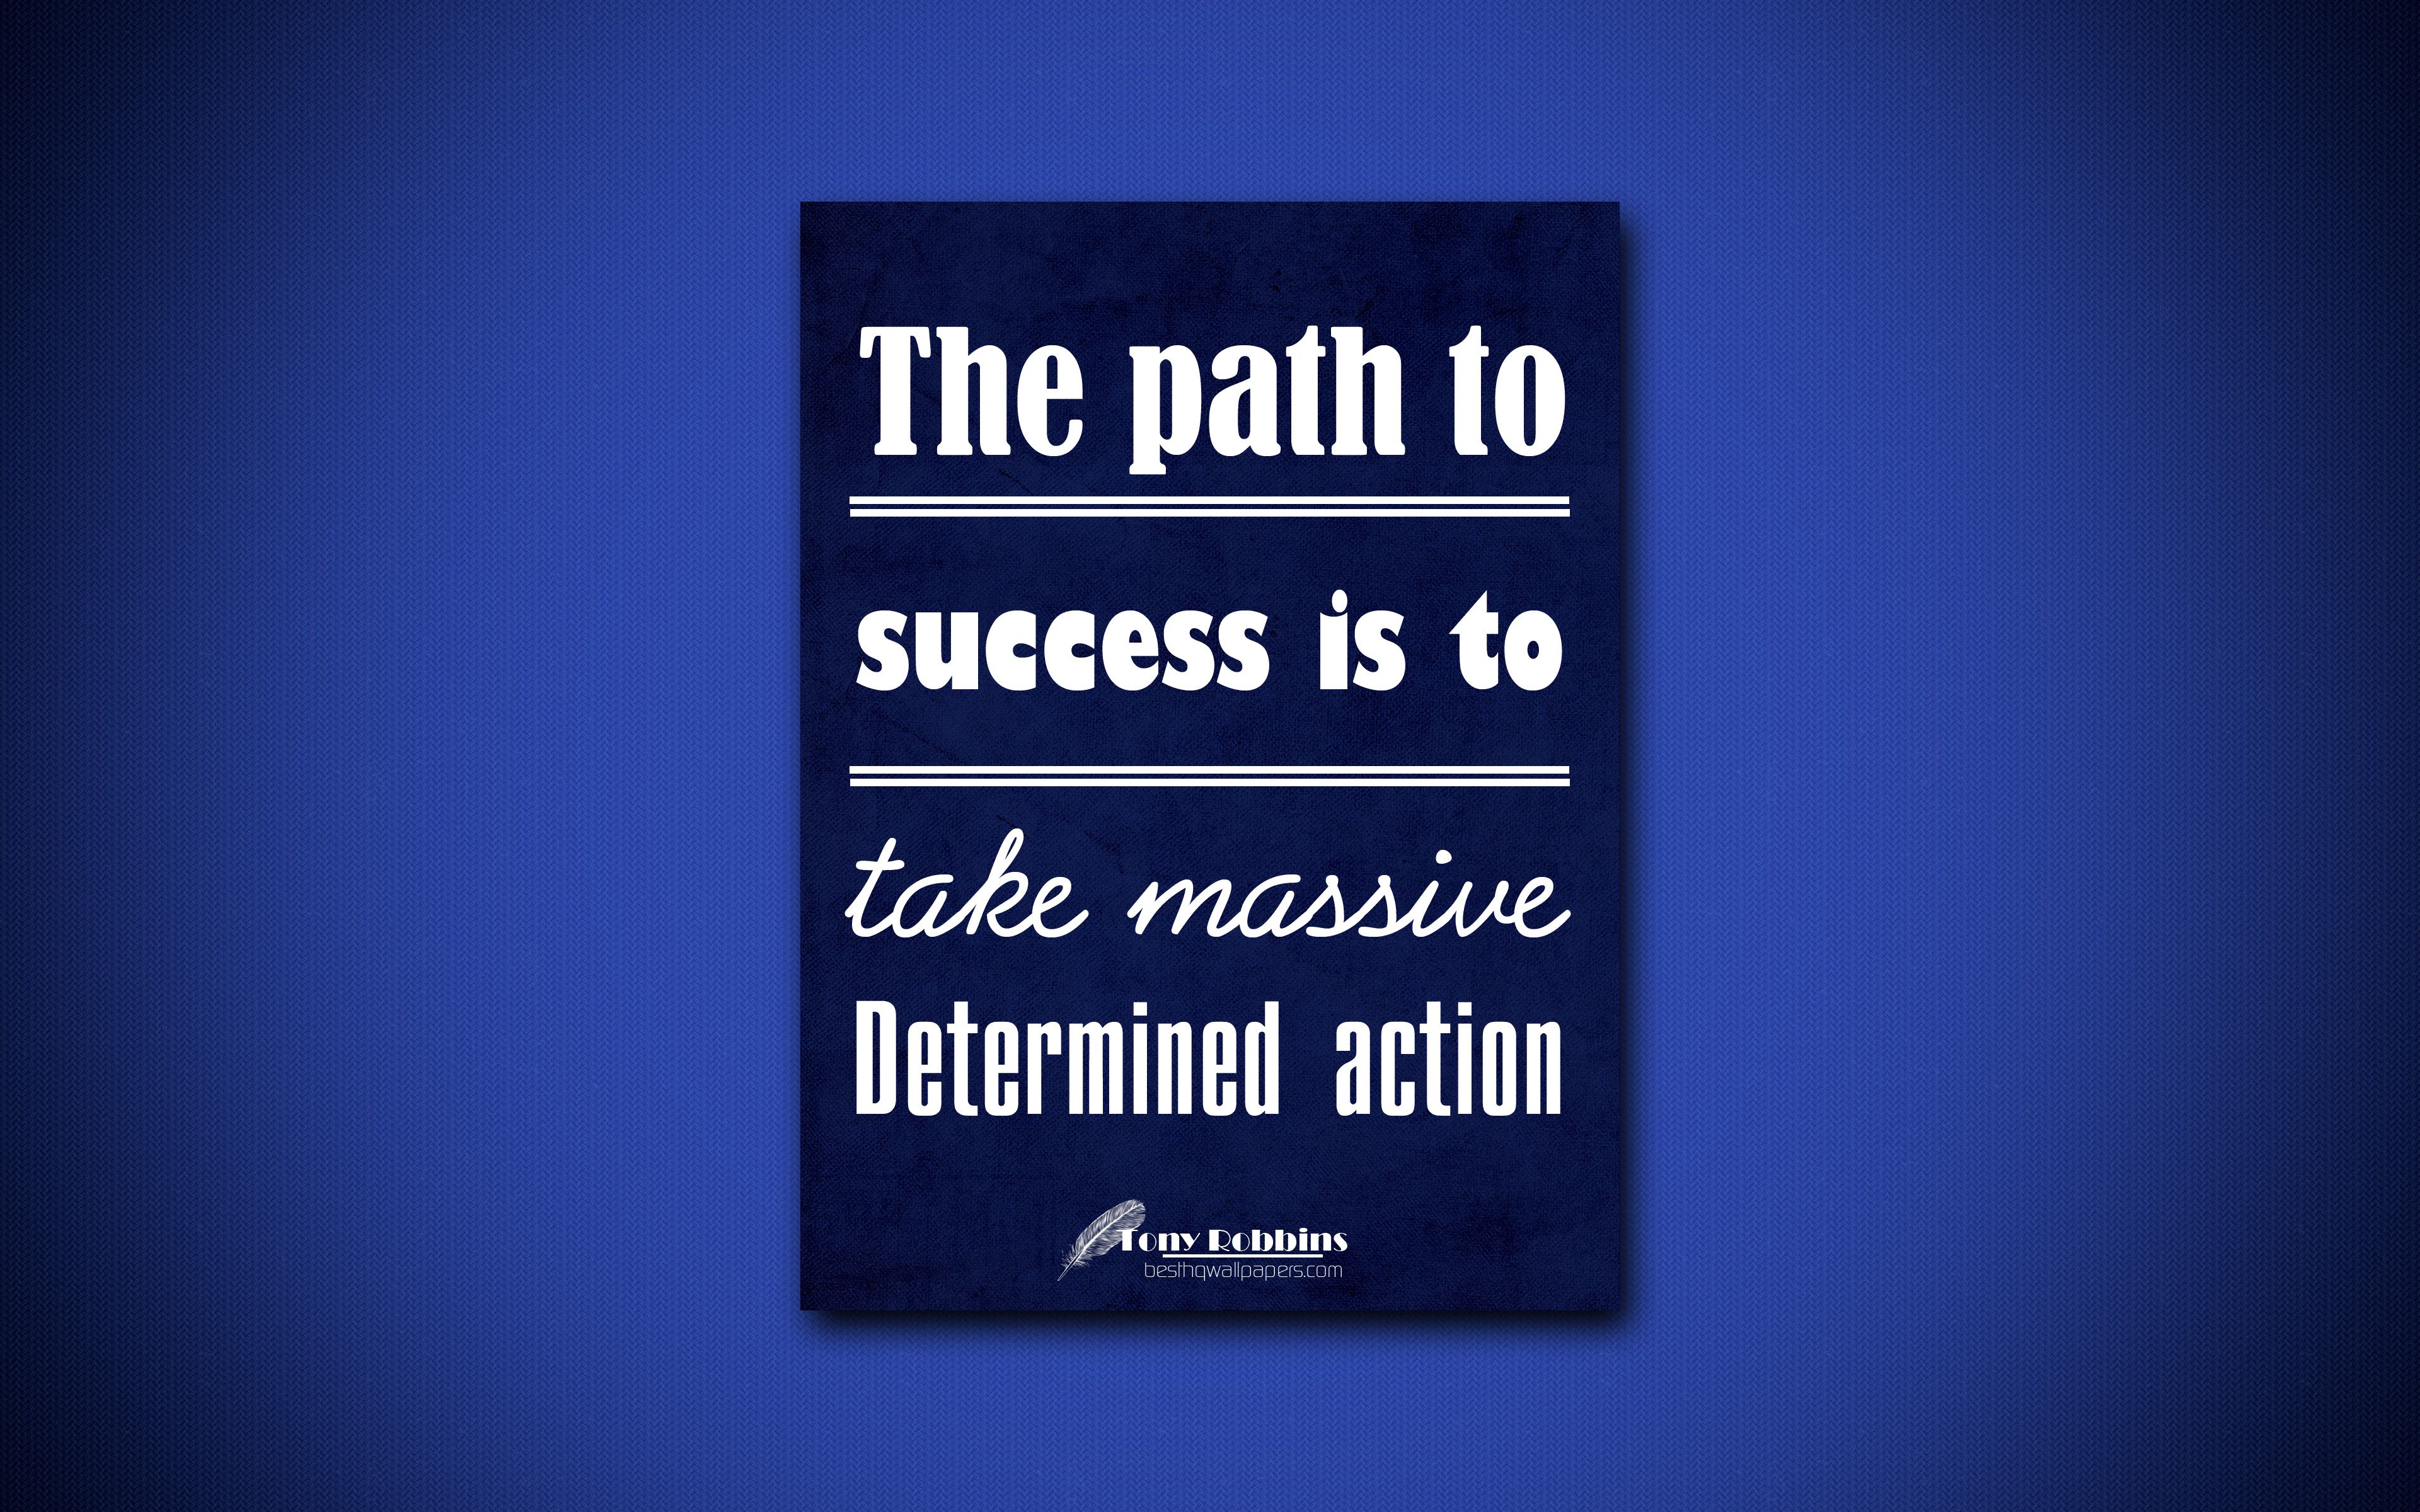 Download wallpaper 4k, The path to success is to take massive